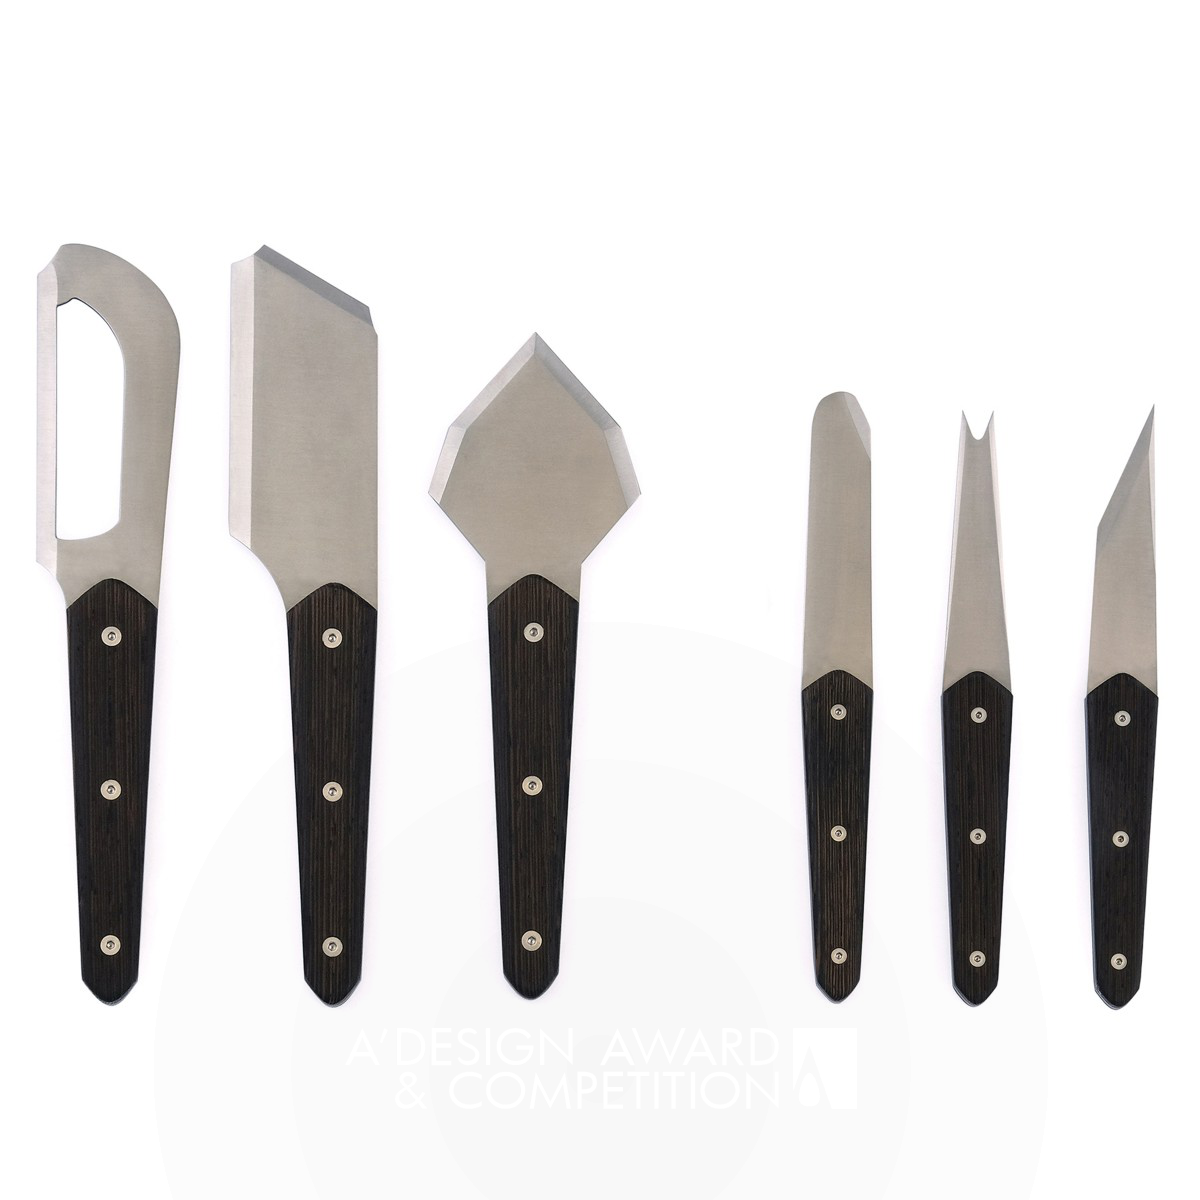 Assaggio cutlery set for cheese tasting